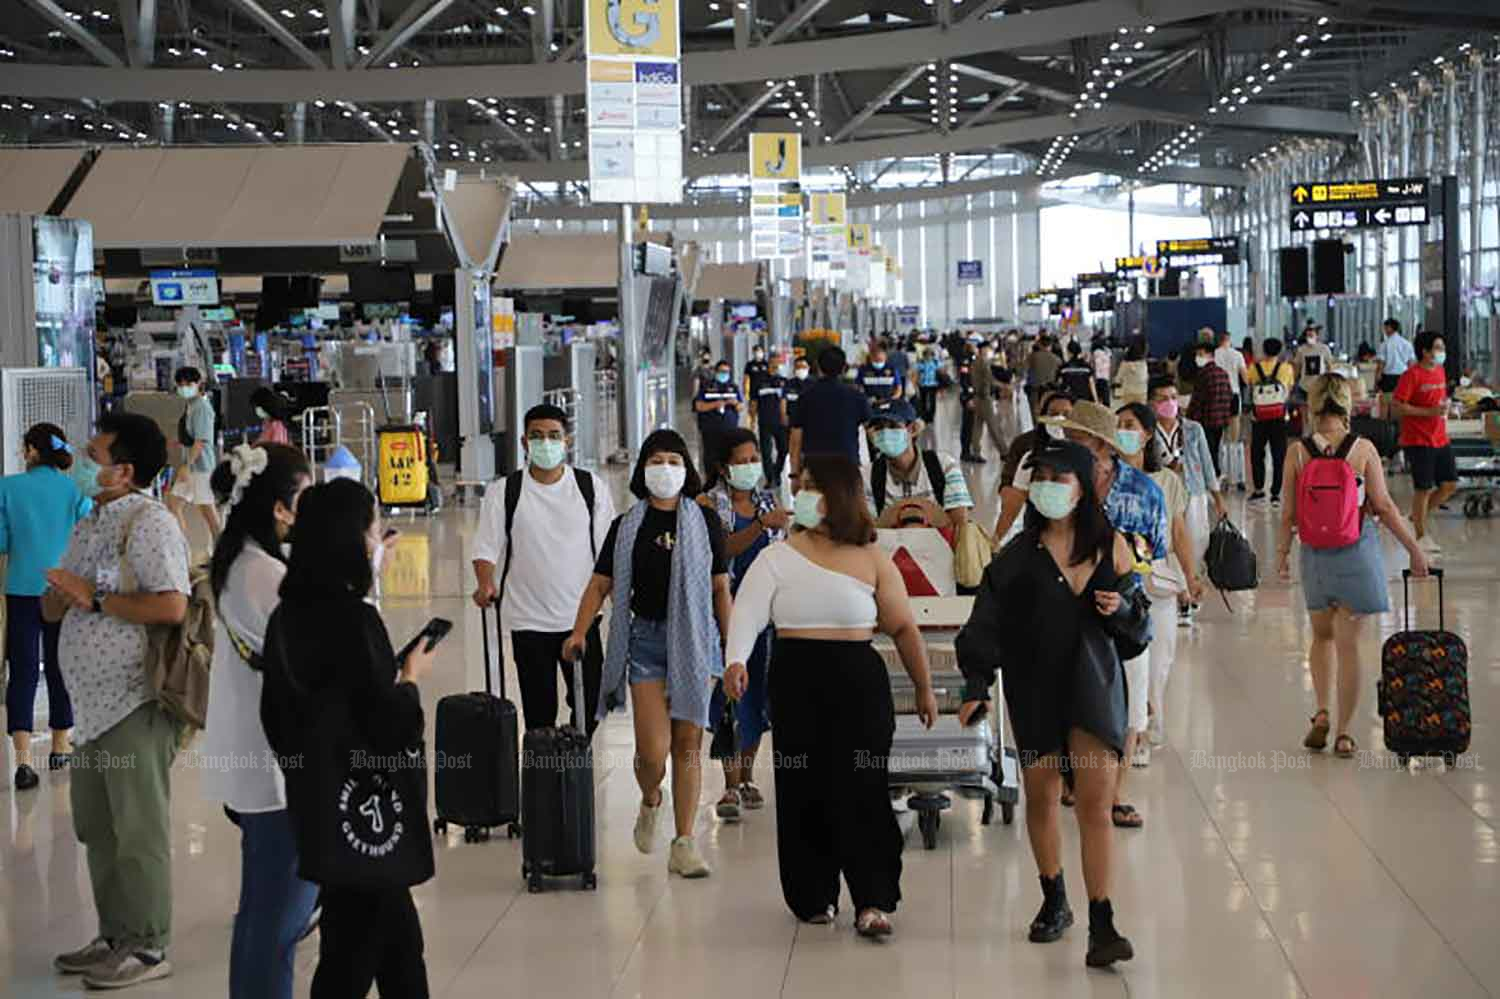 No Covid tests on arrival for vaccinated travellers from May 1